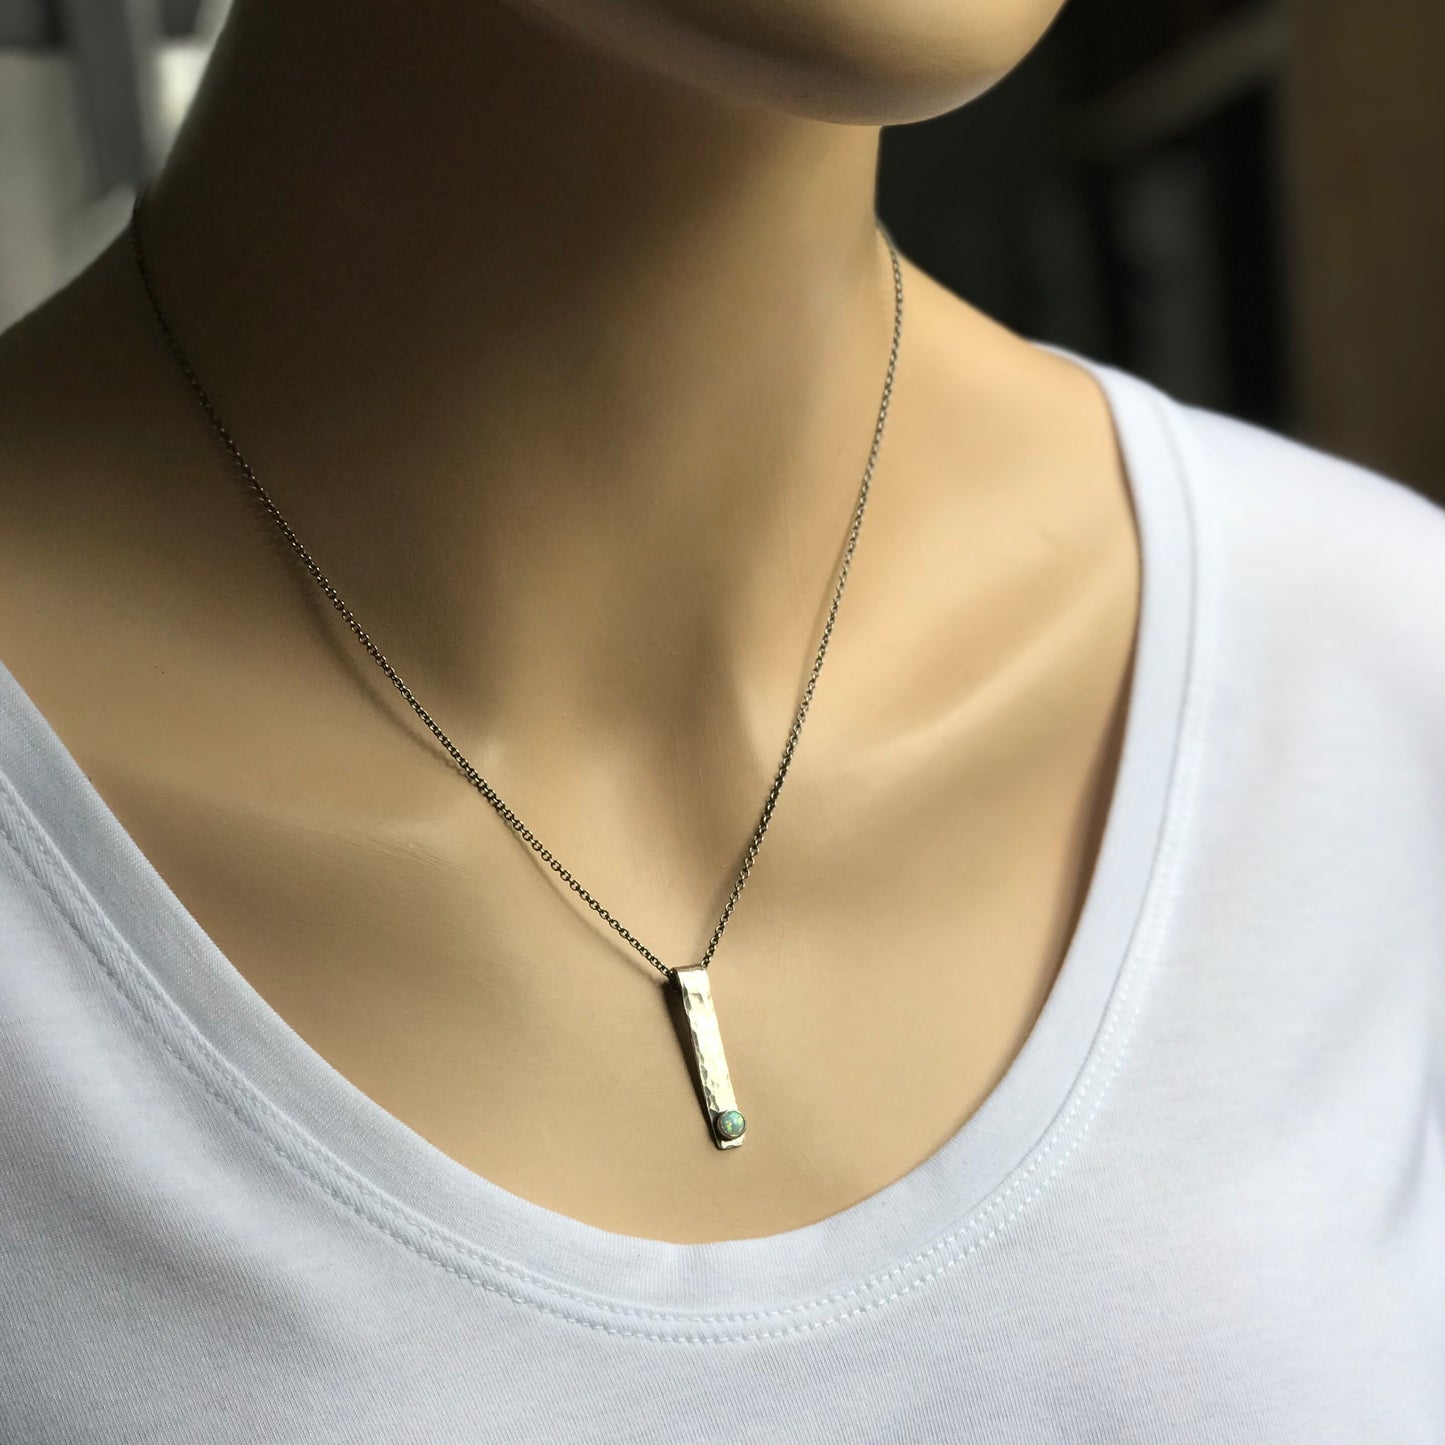 Opal and Sterling Silver Bar Necklace - Hammered Sterling Silver Bar and Simulated Opal Cabochon Pendant Necklace